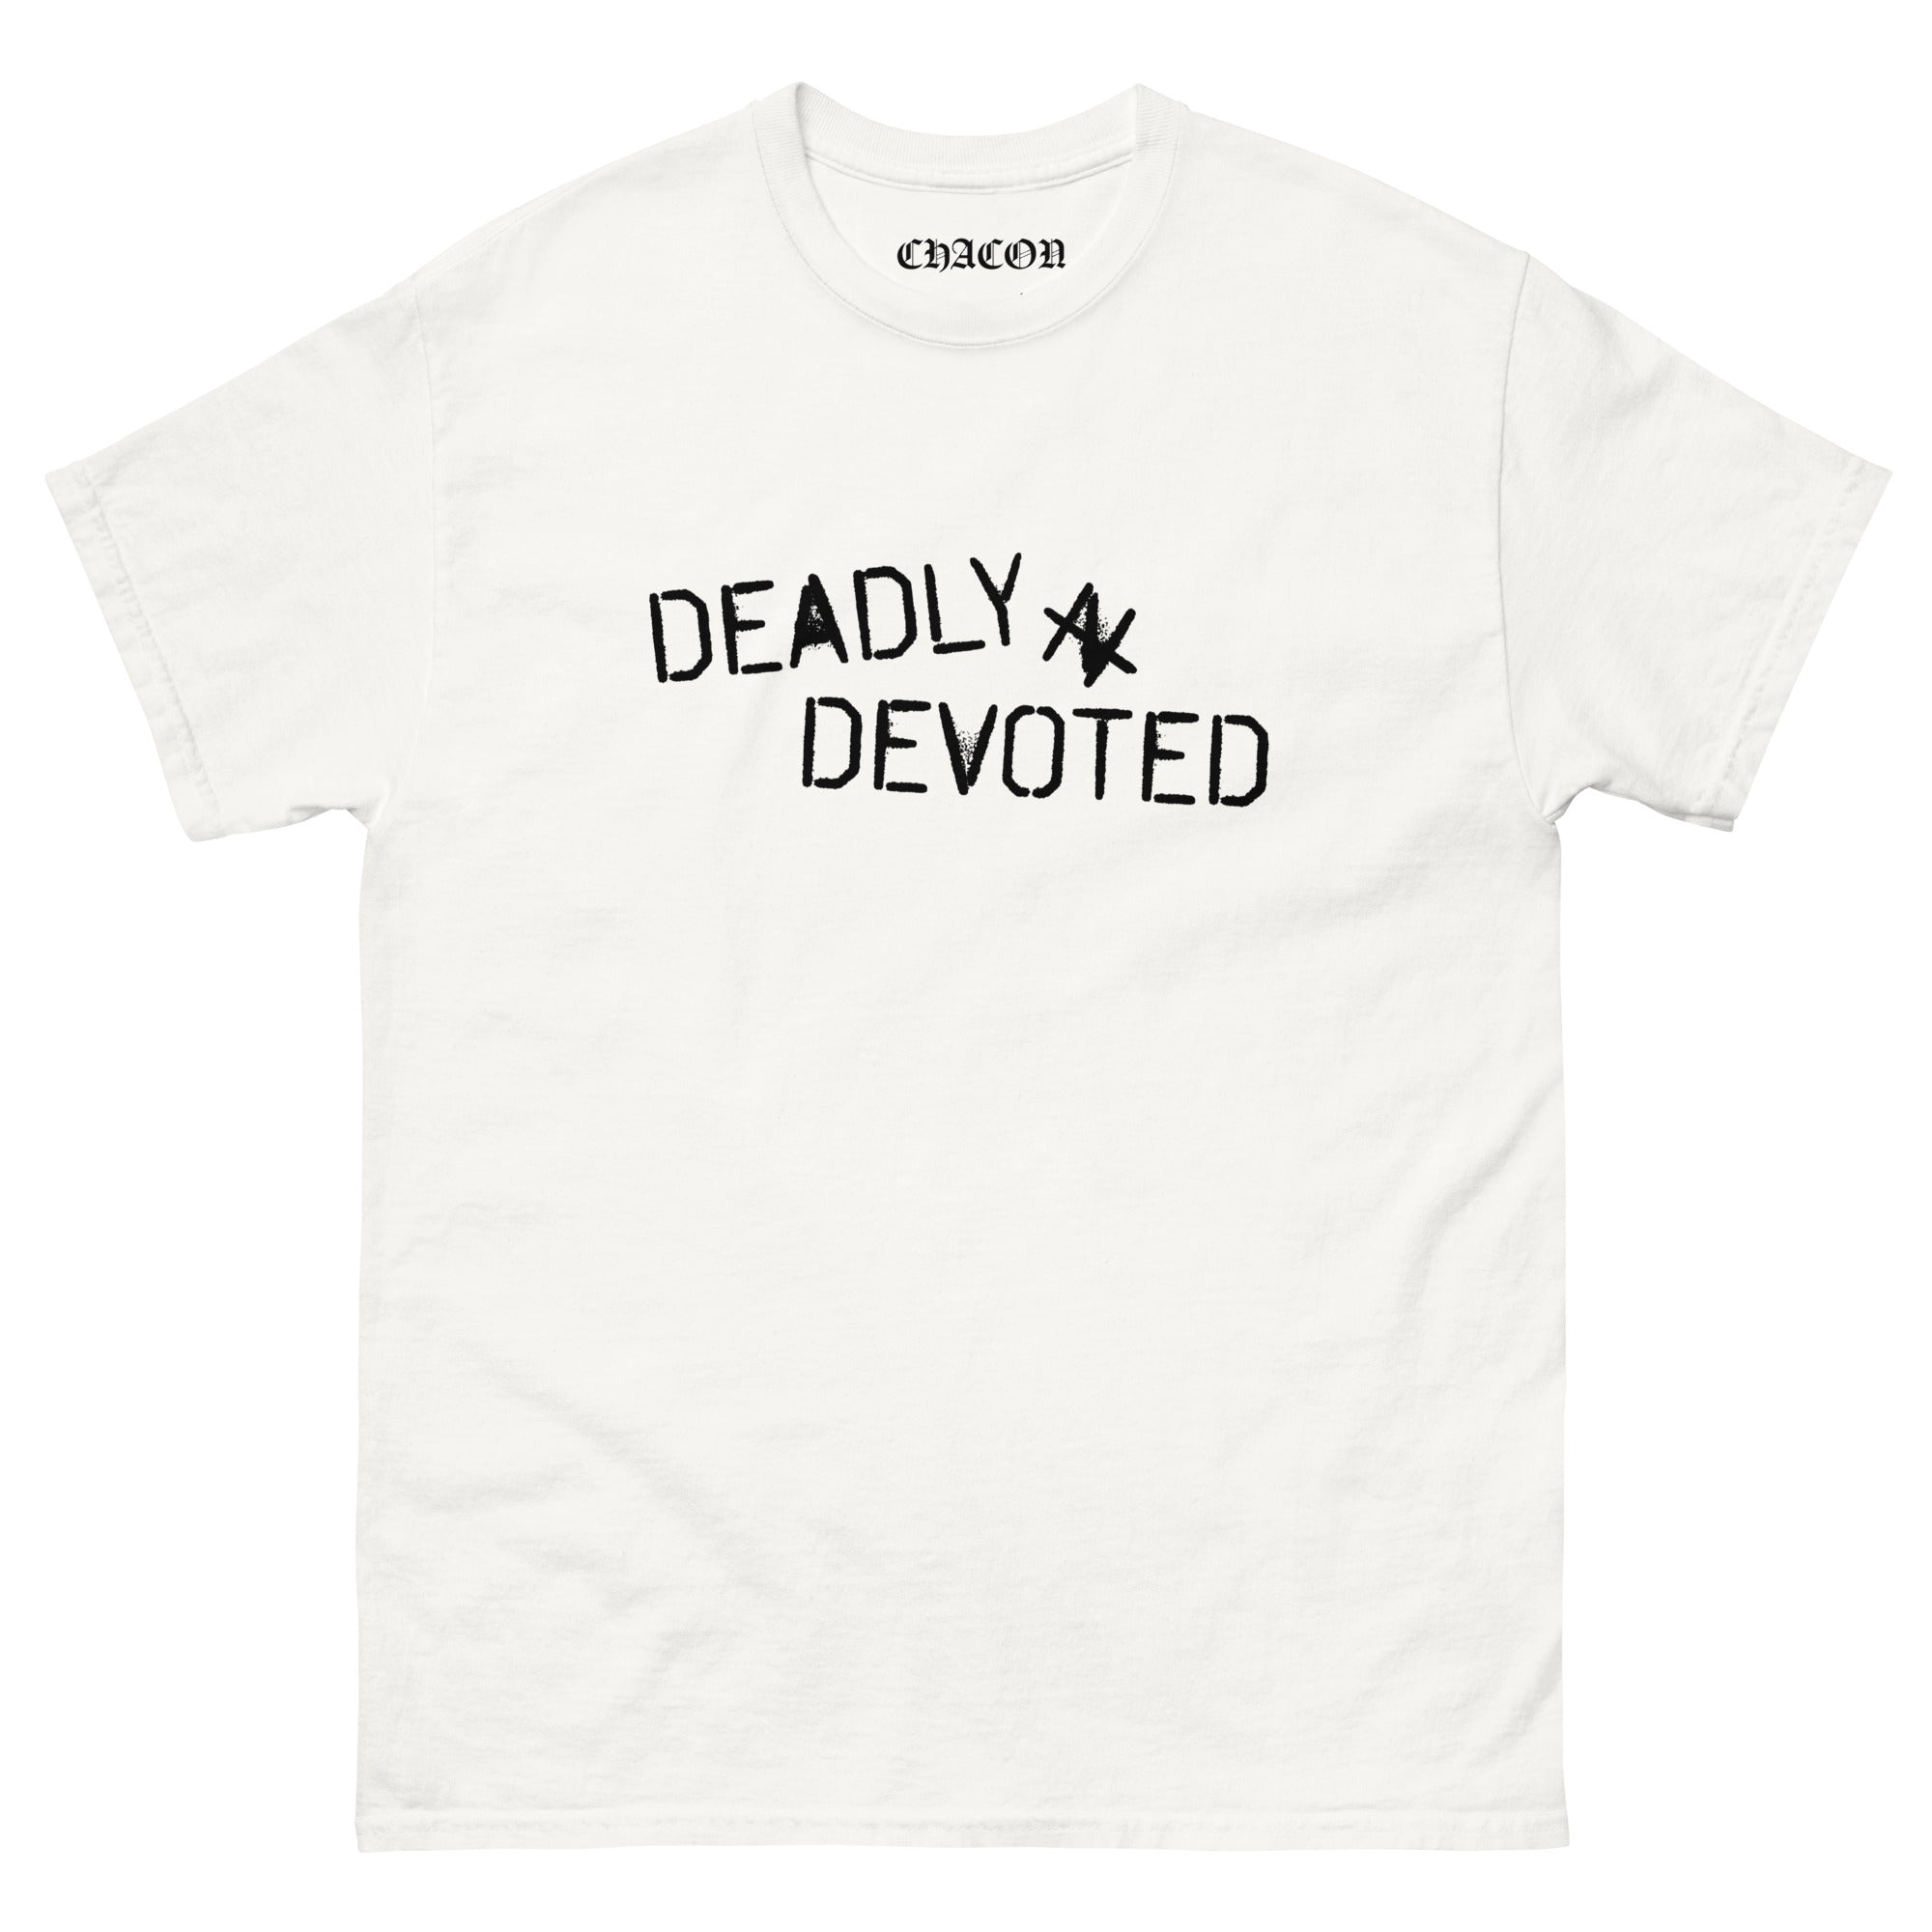 Deadly N Devoted Crew Neck Tee Black Graphic